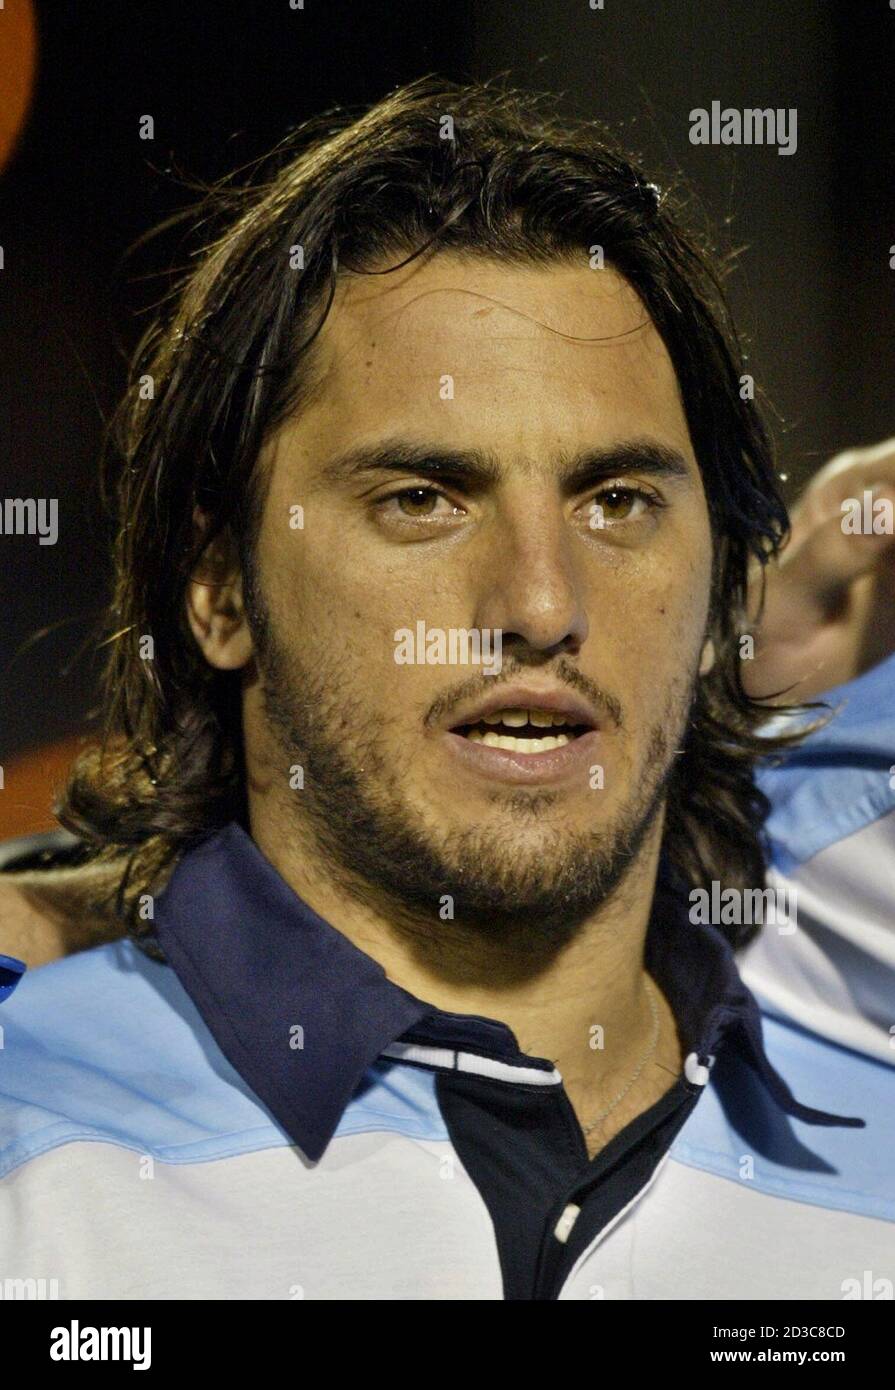 File photo of rugby player, halfback, Agustin Pichot, who was named captain  of the Argentine side Los Pumas September 16, 2003, instead of Lizandro  Arbizu, ruled out of the Rugby World Cup